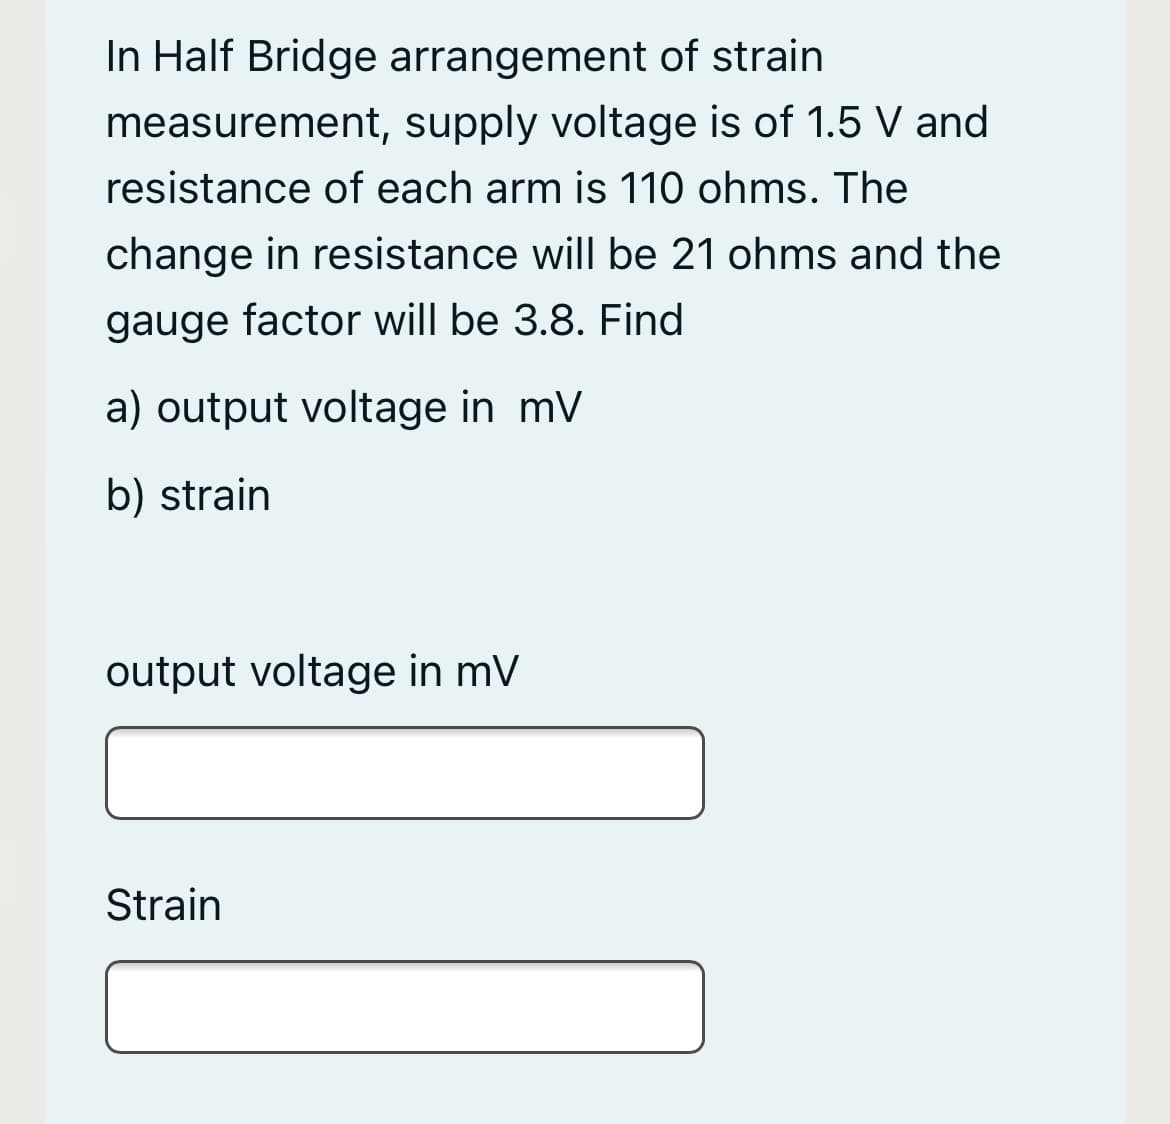 In Half Bridge arrangement of strain
measurement, supply voltage is of 1.5 V and
resistance of each arm is 110 ohms. The
change in resistance will be 21 ohms and the
gauge factor will be 3.8. Find
a) output voltage in mV
b) strain
output voltage in mV
Strain
